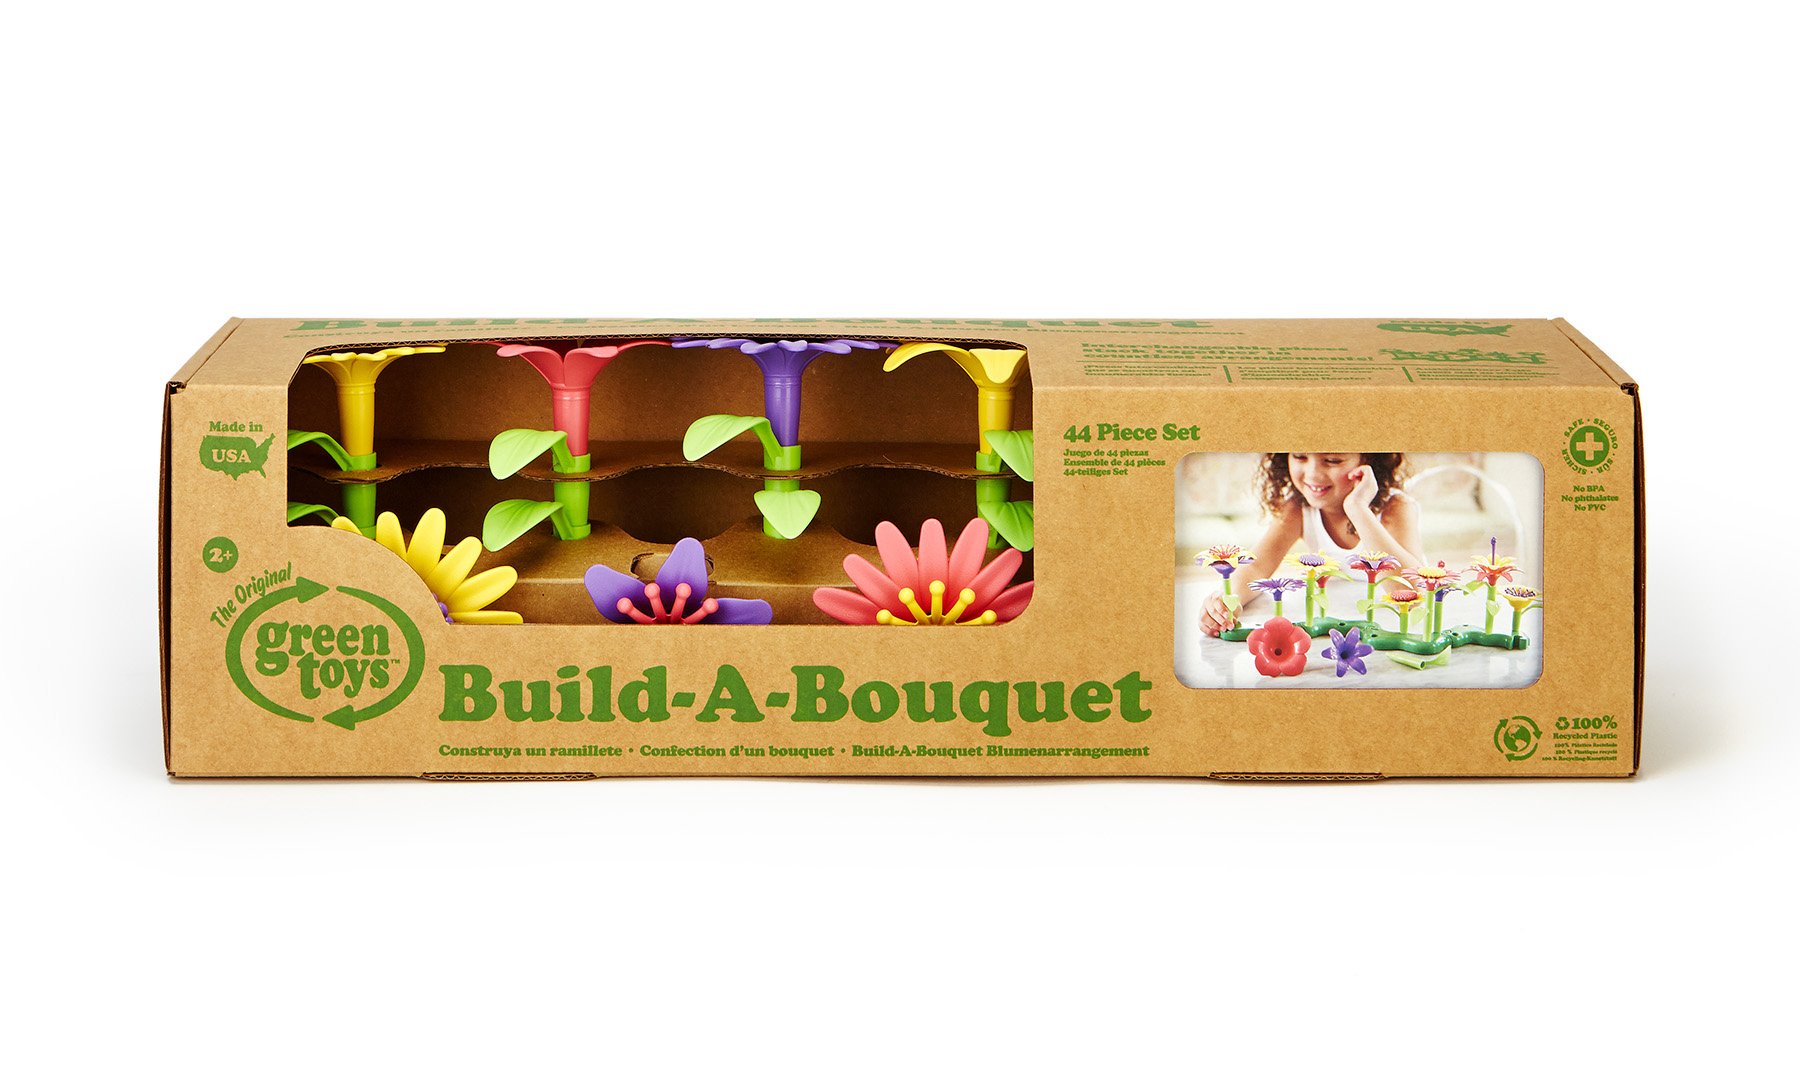 Green Toys Build-a-Bouquet Floral Arrangement Playset - BPA Free, Phthalates Free, Creative Play Toys for Gross Motors, Fine Motor Skill Development. Toys and Games